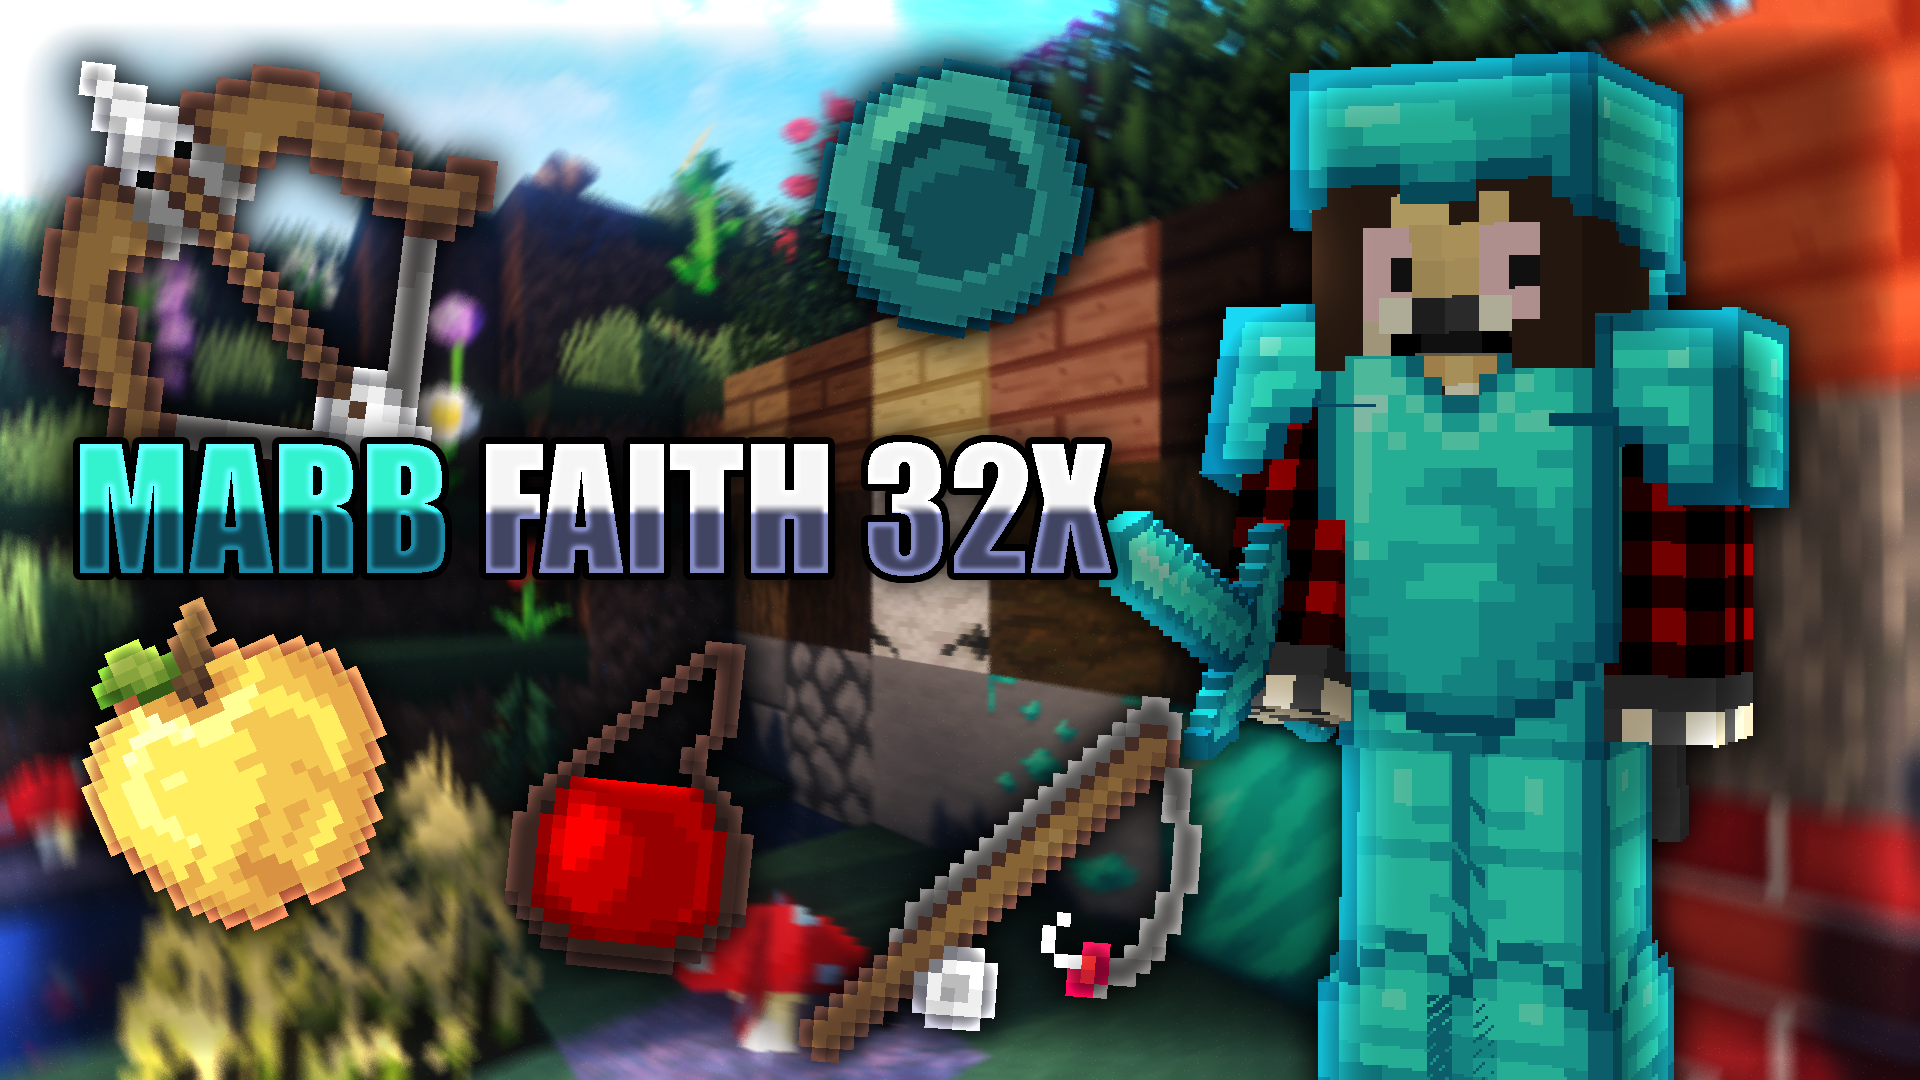 Gallery Banner for marb faith on PvPRP